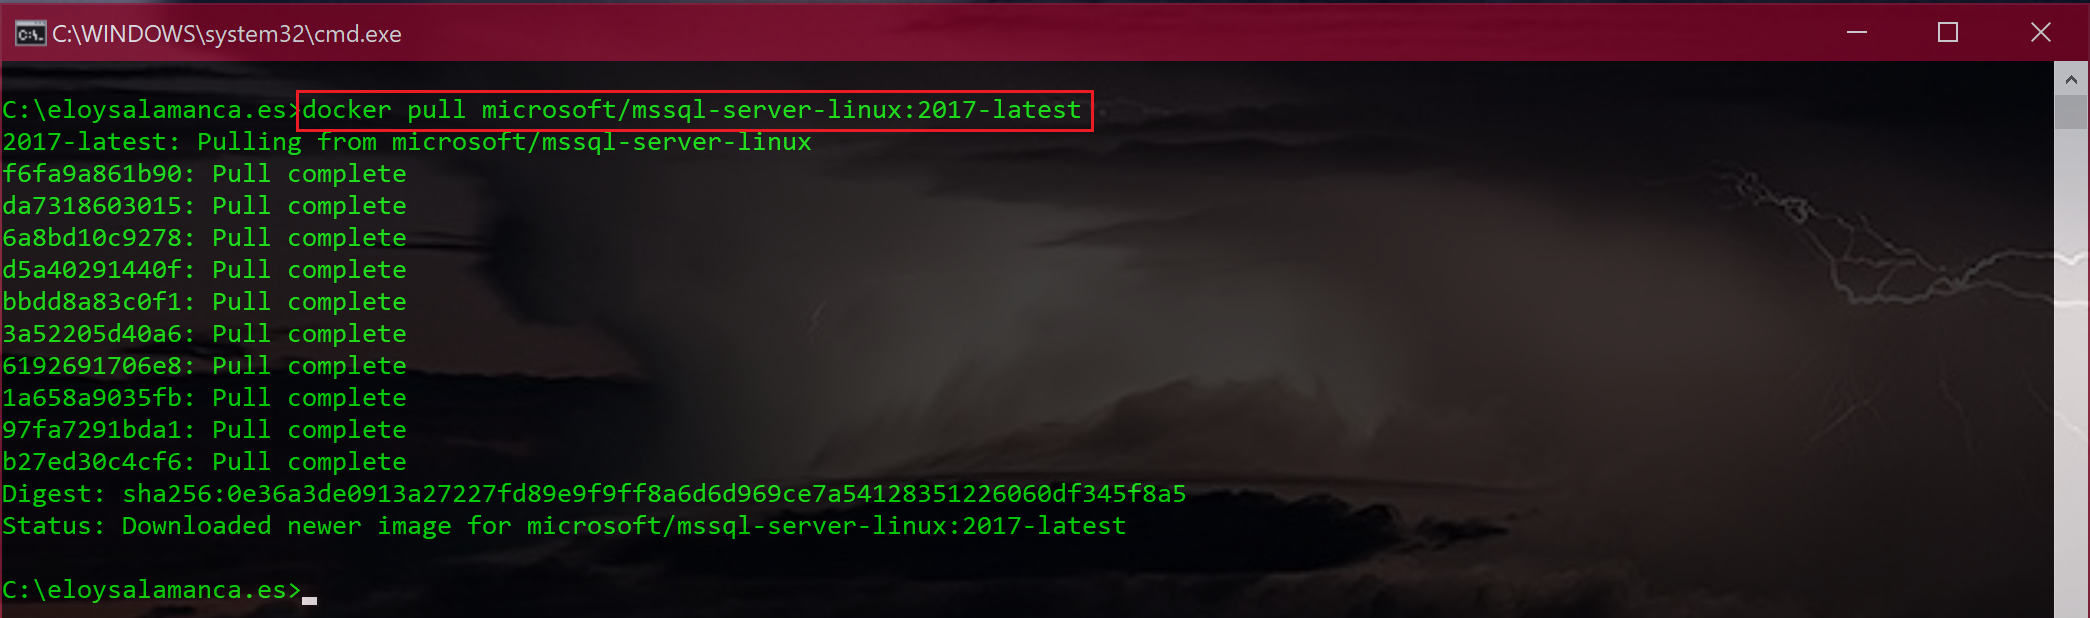 Setting up SQL Server 2017 for linux on your computer with Docker